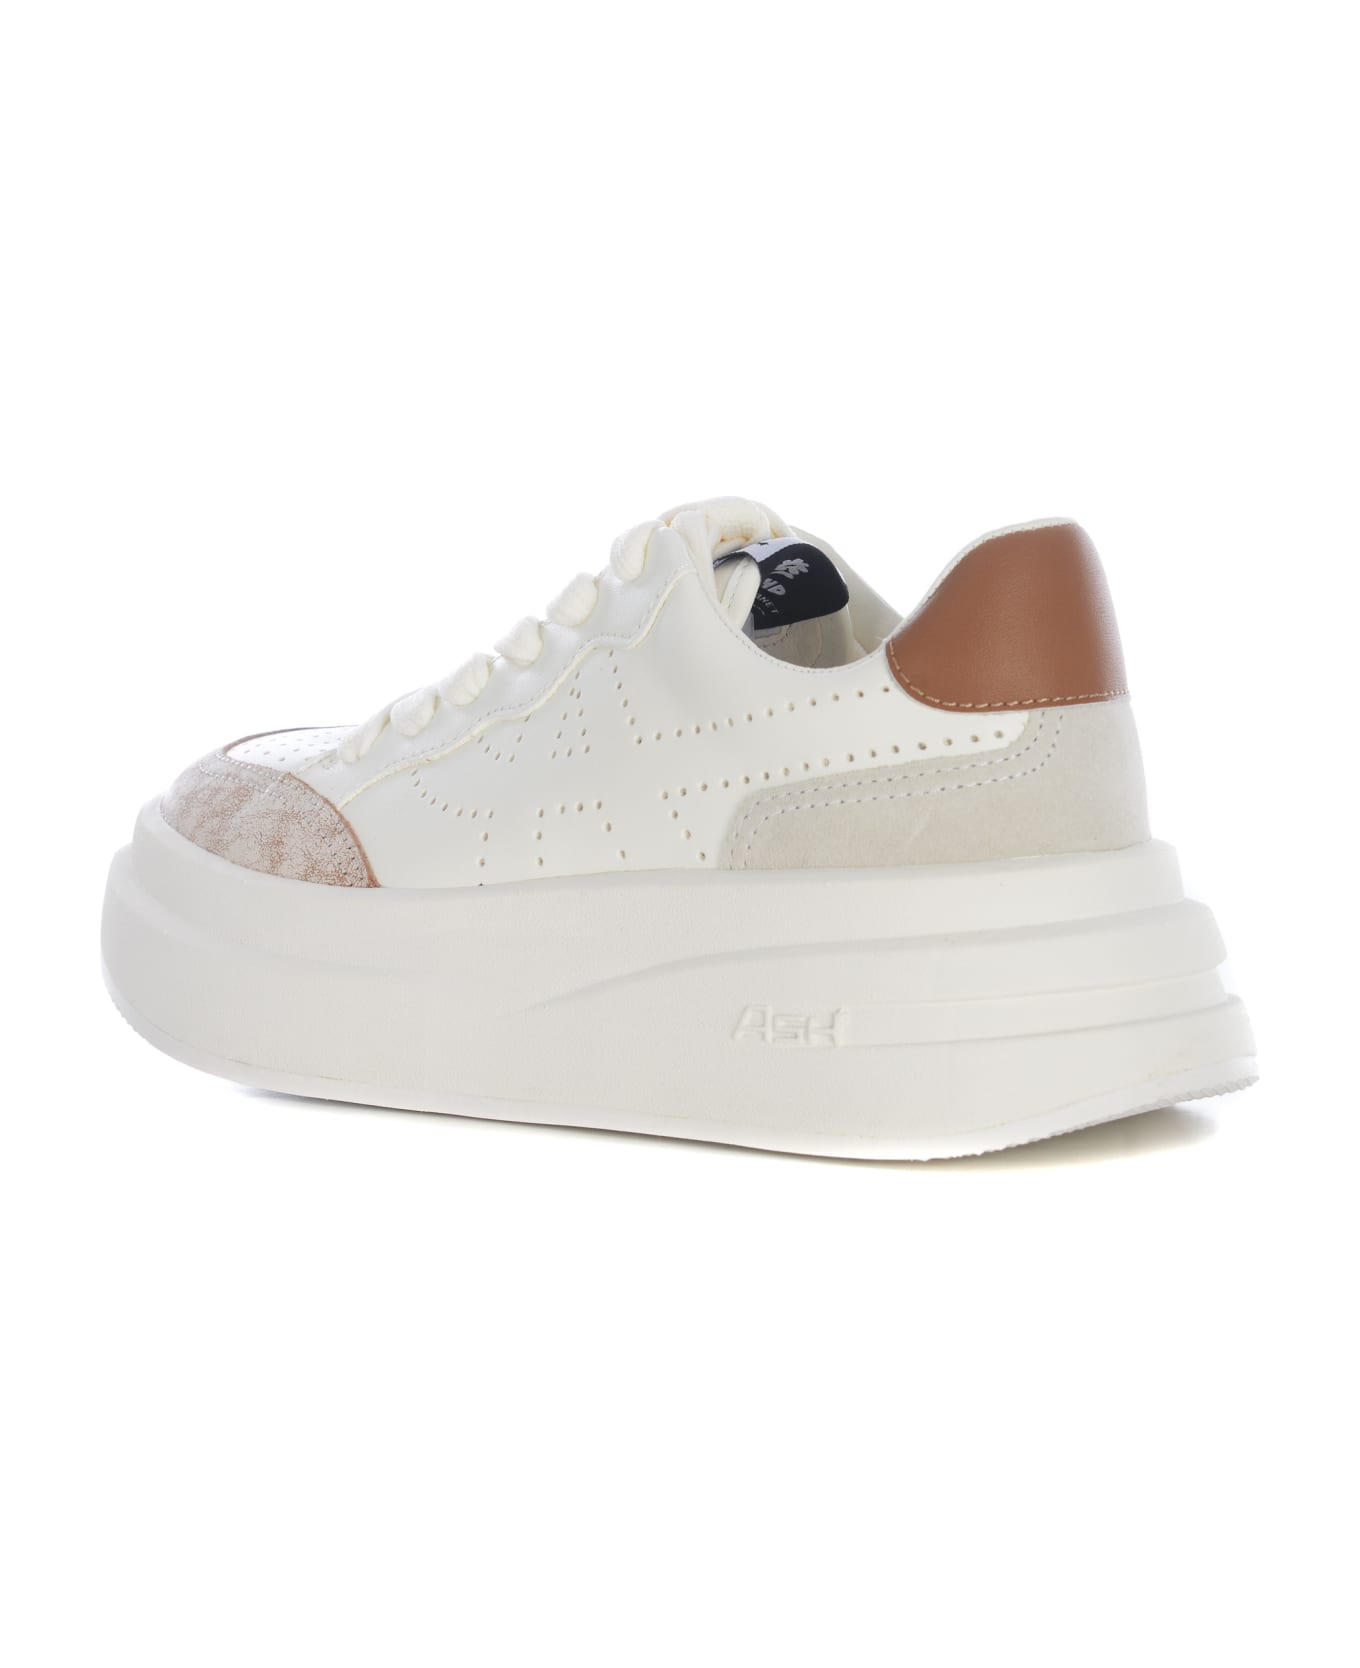 Ash Sneakers Ash "impuls" Made Of Leather - Bianco ウェッジシューズ